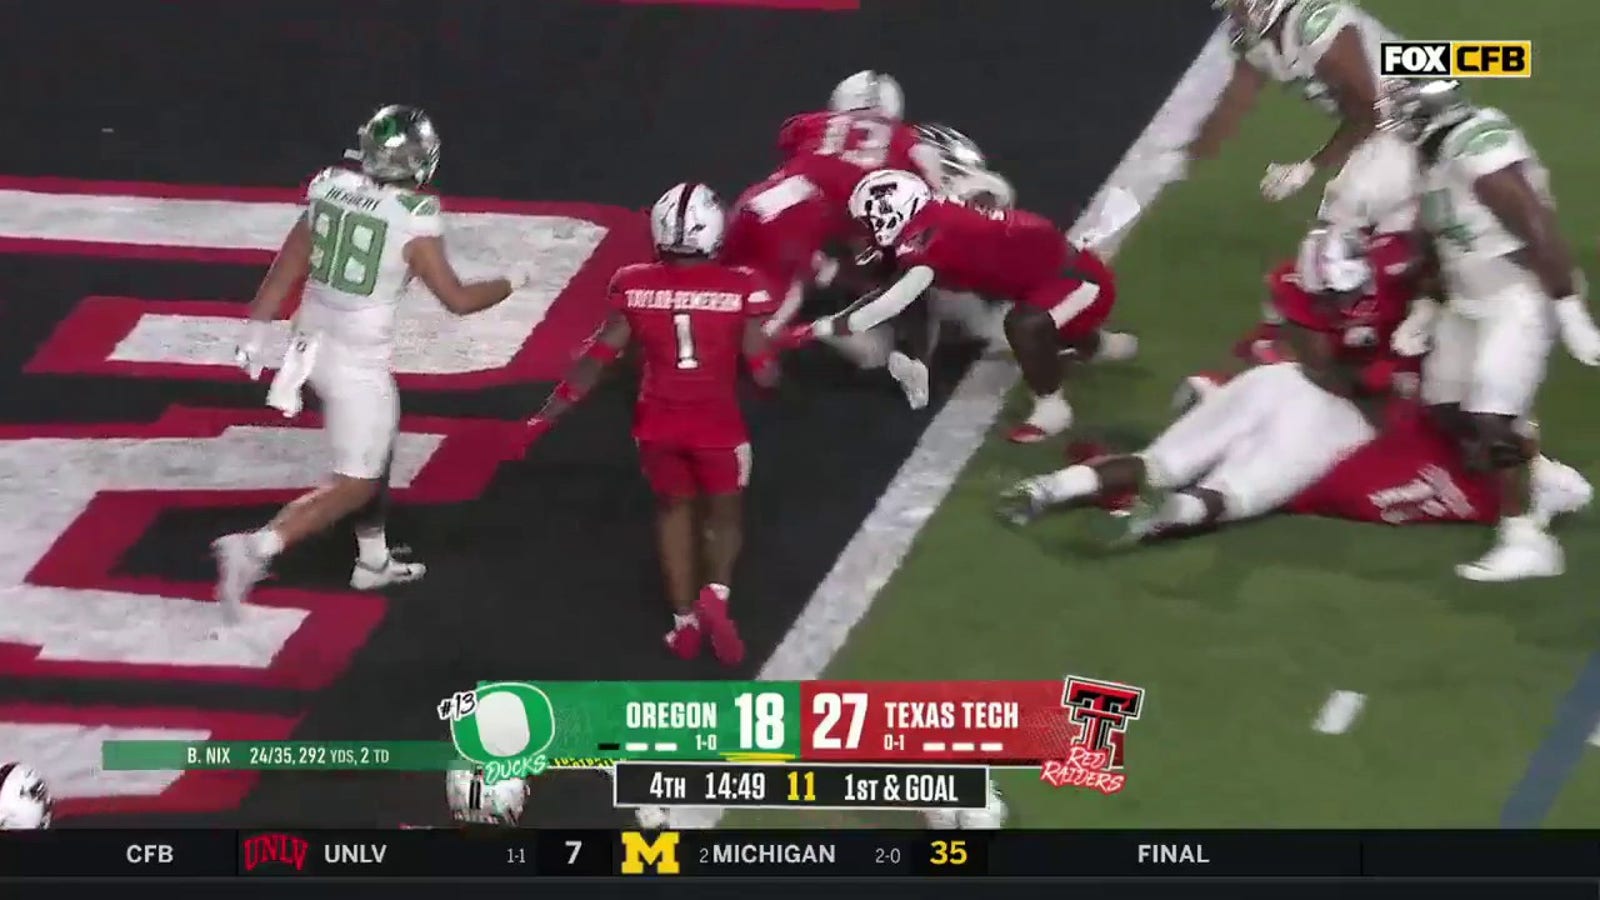 Oregon's Bucky Irving rushes it up the middle for a 3-yard touchdown vs. Texas Tech